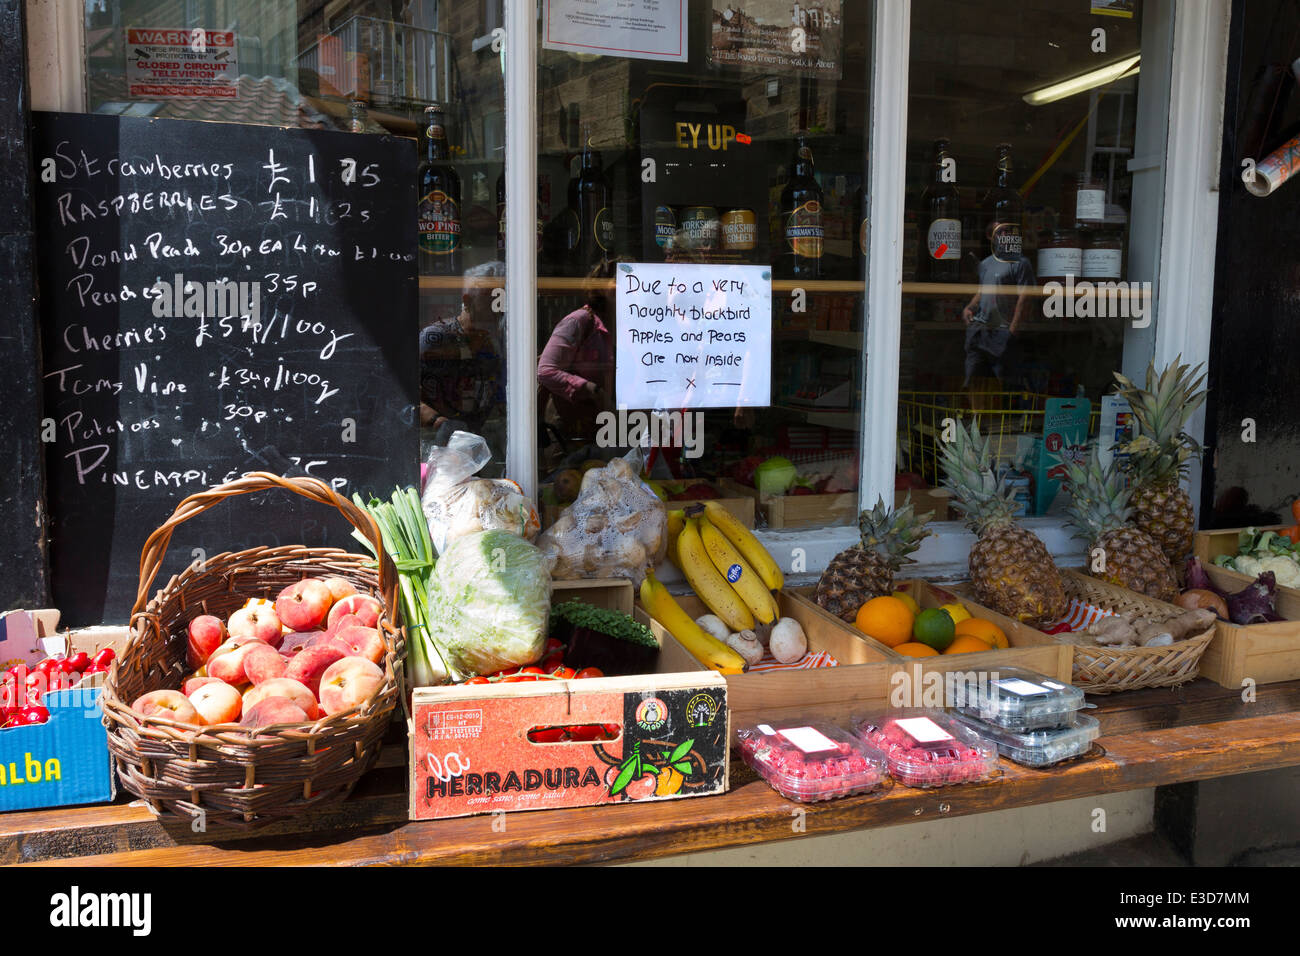 Shop Selling Fruit with a Hand Written Notice 'Due to a Very Naughty Blackbird Apples and Pears are Now Inside' Yorkshire Stock Photo